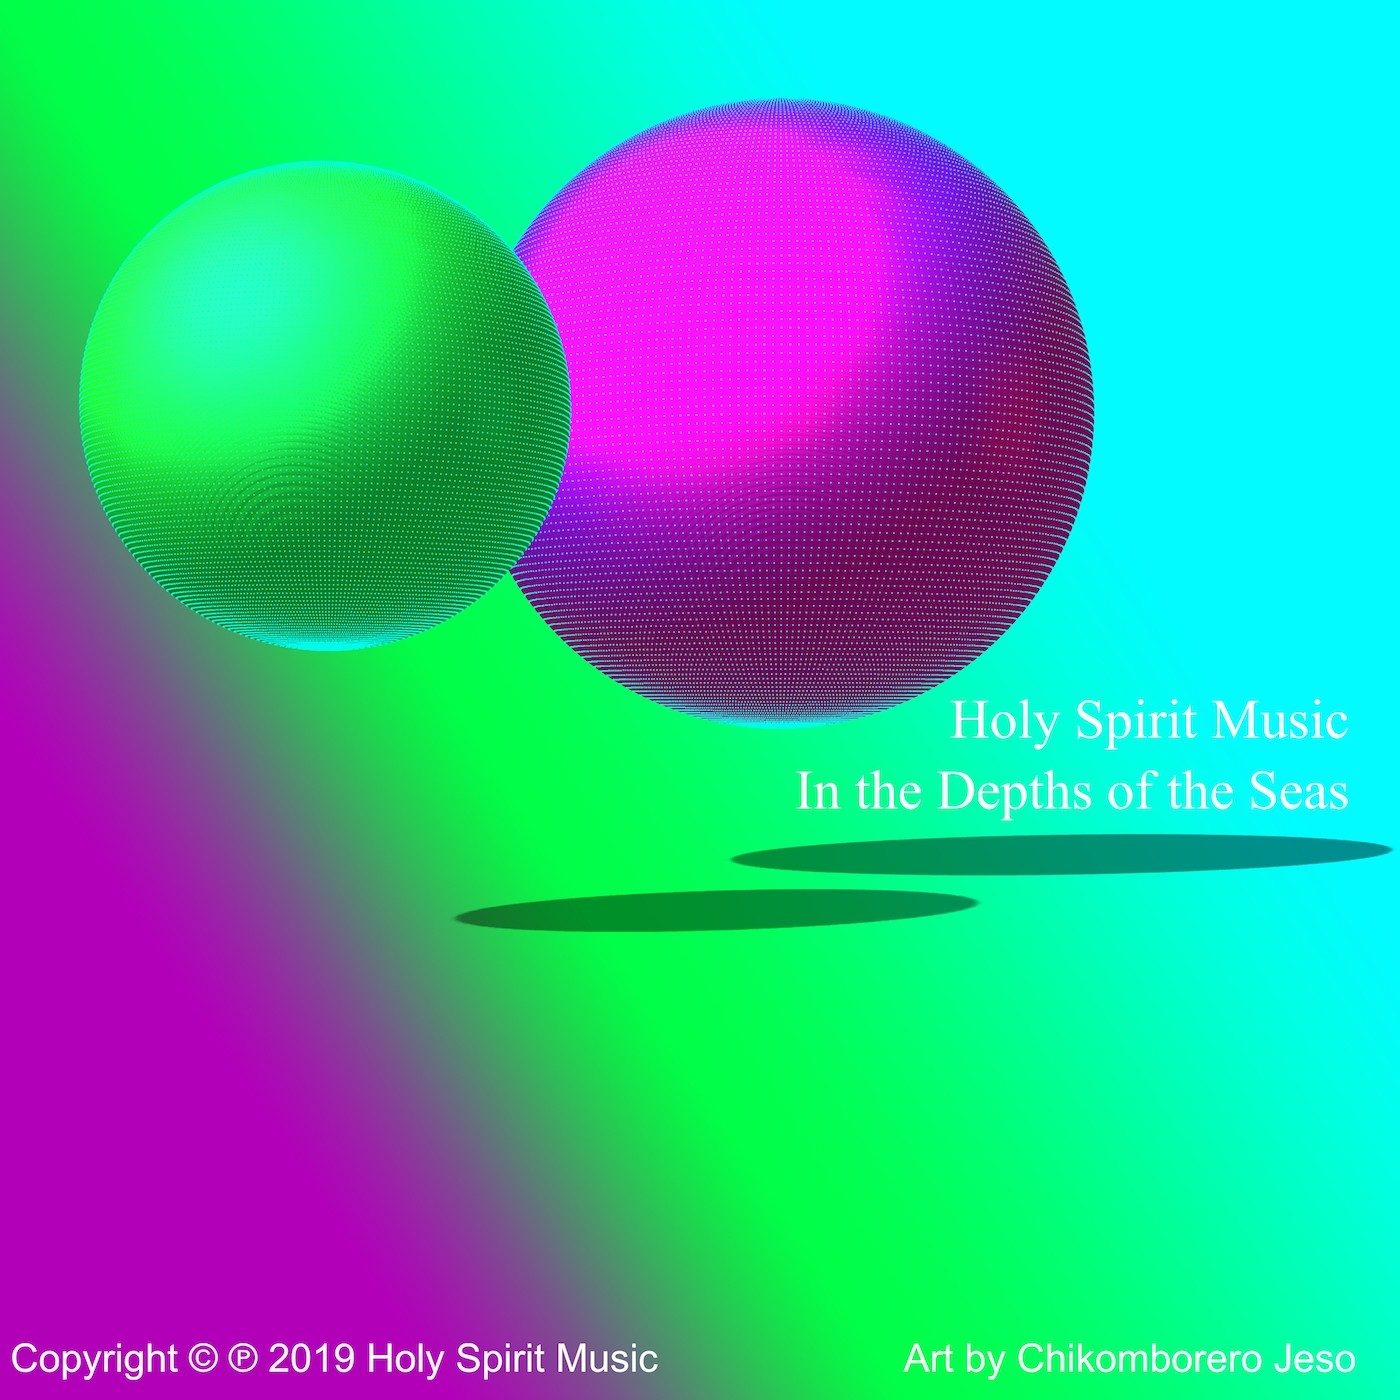 Holy Spirit Music - In the Depths of the Seas - Music Cover Art